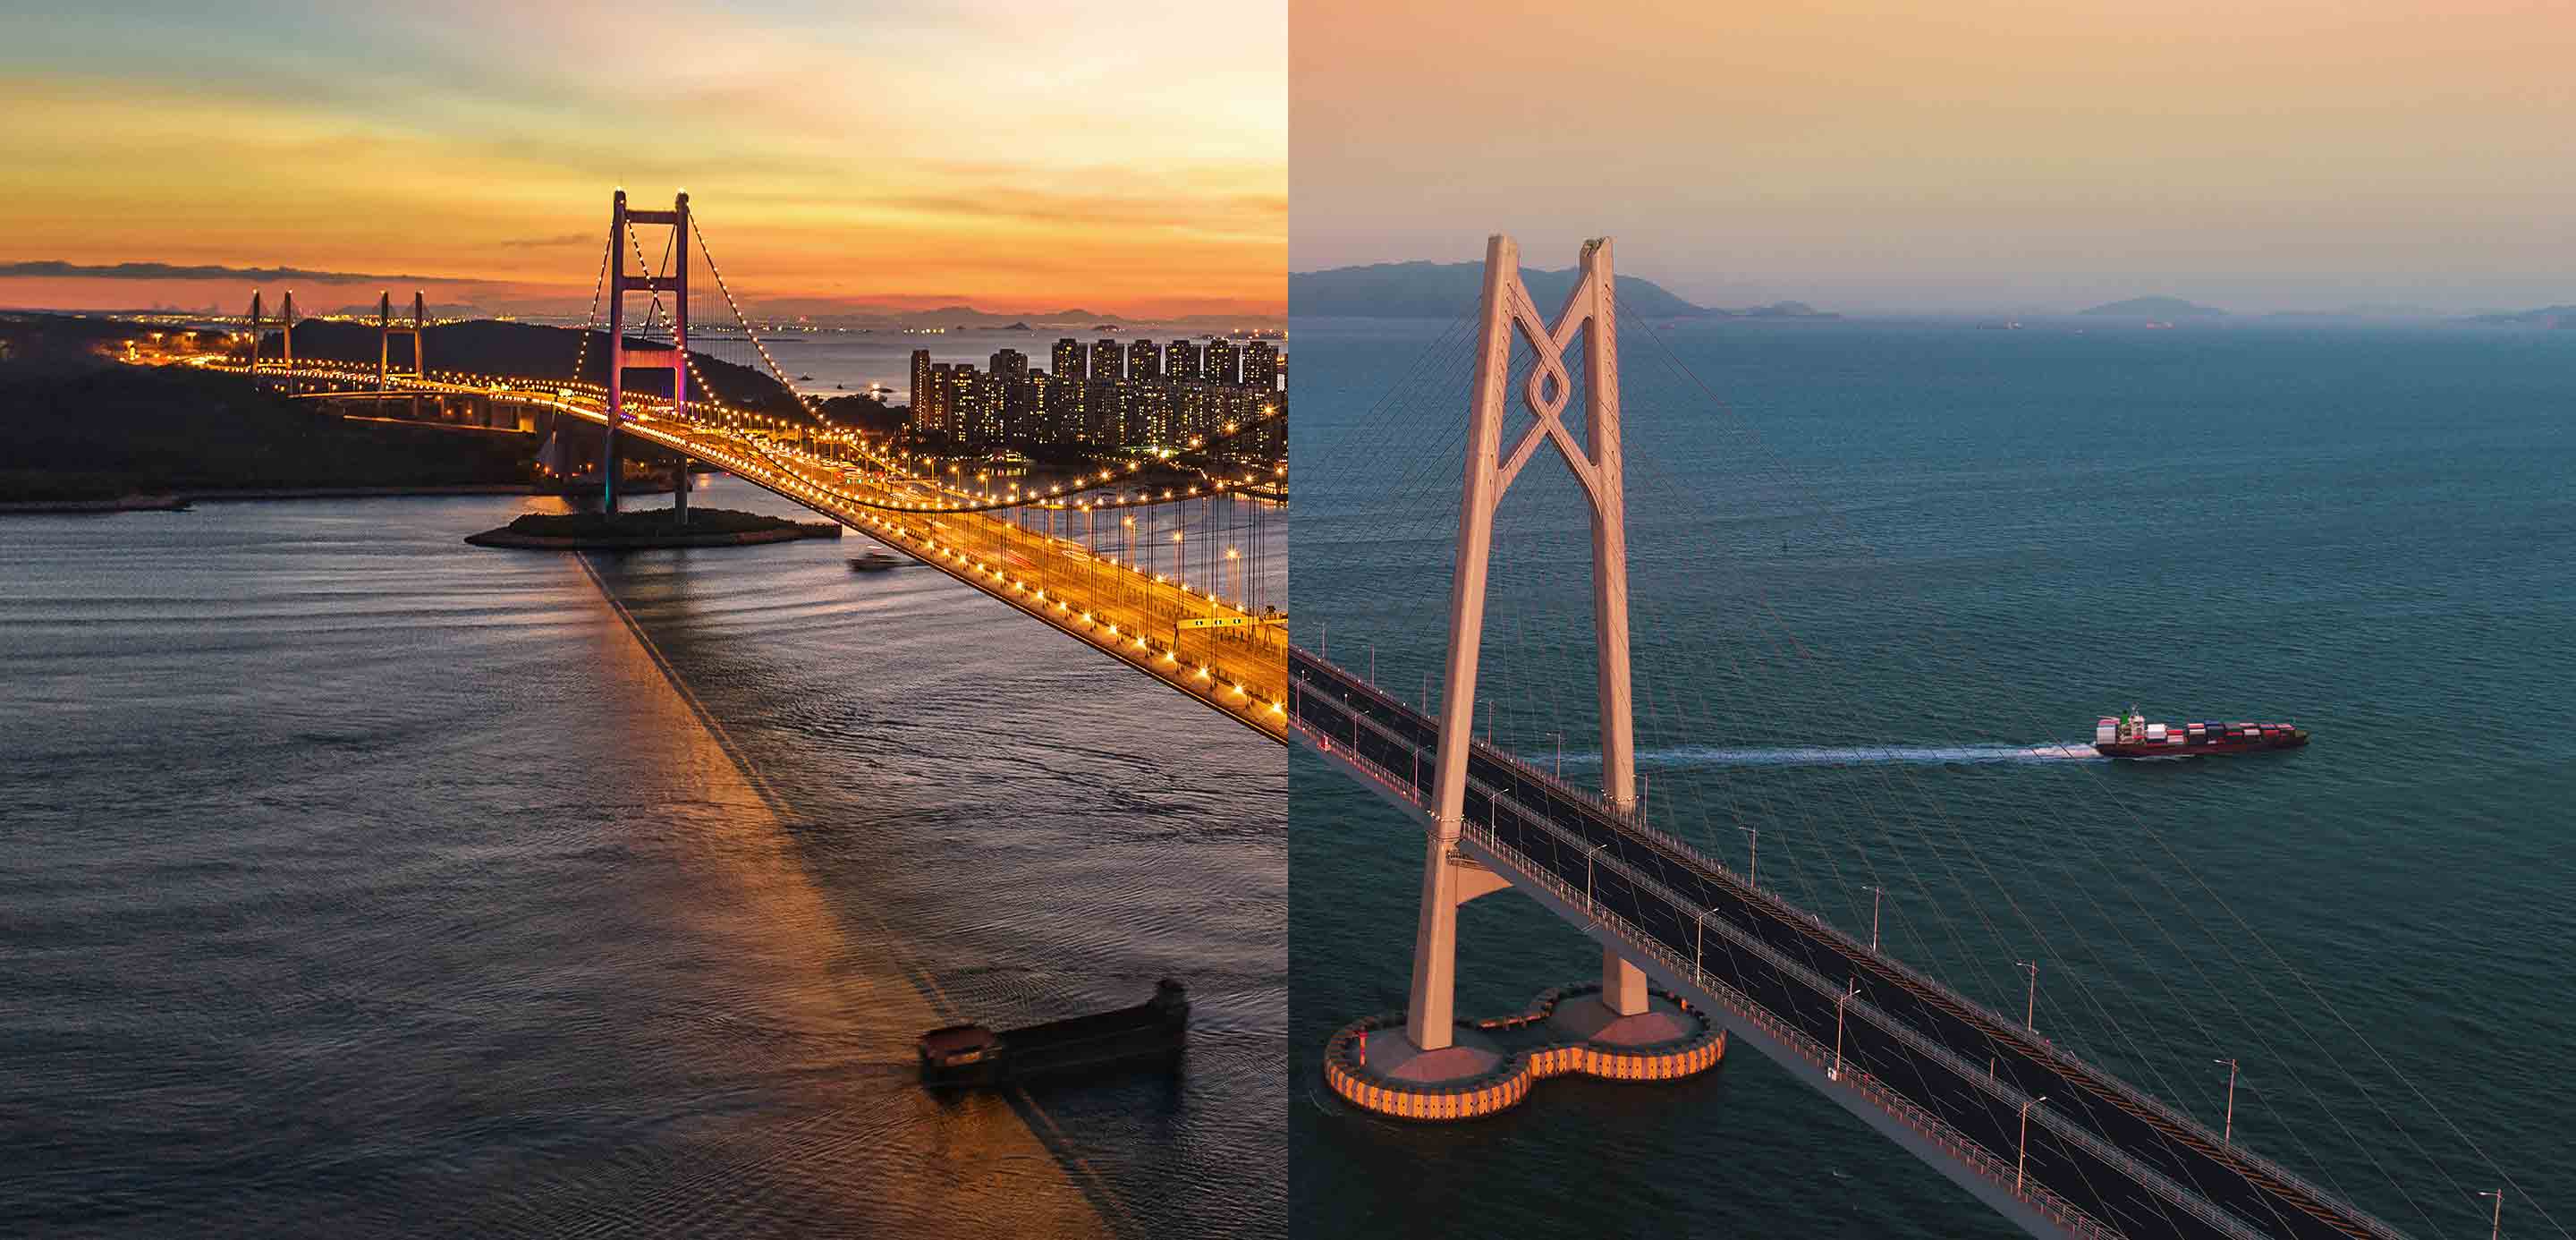 A half-half  combination of HK and PRD bridge to demostrate the connection of trade between two cities.